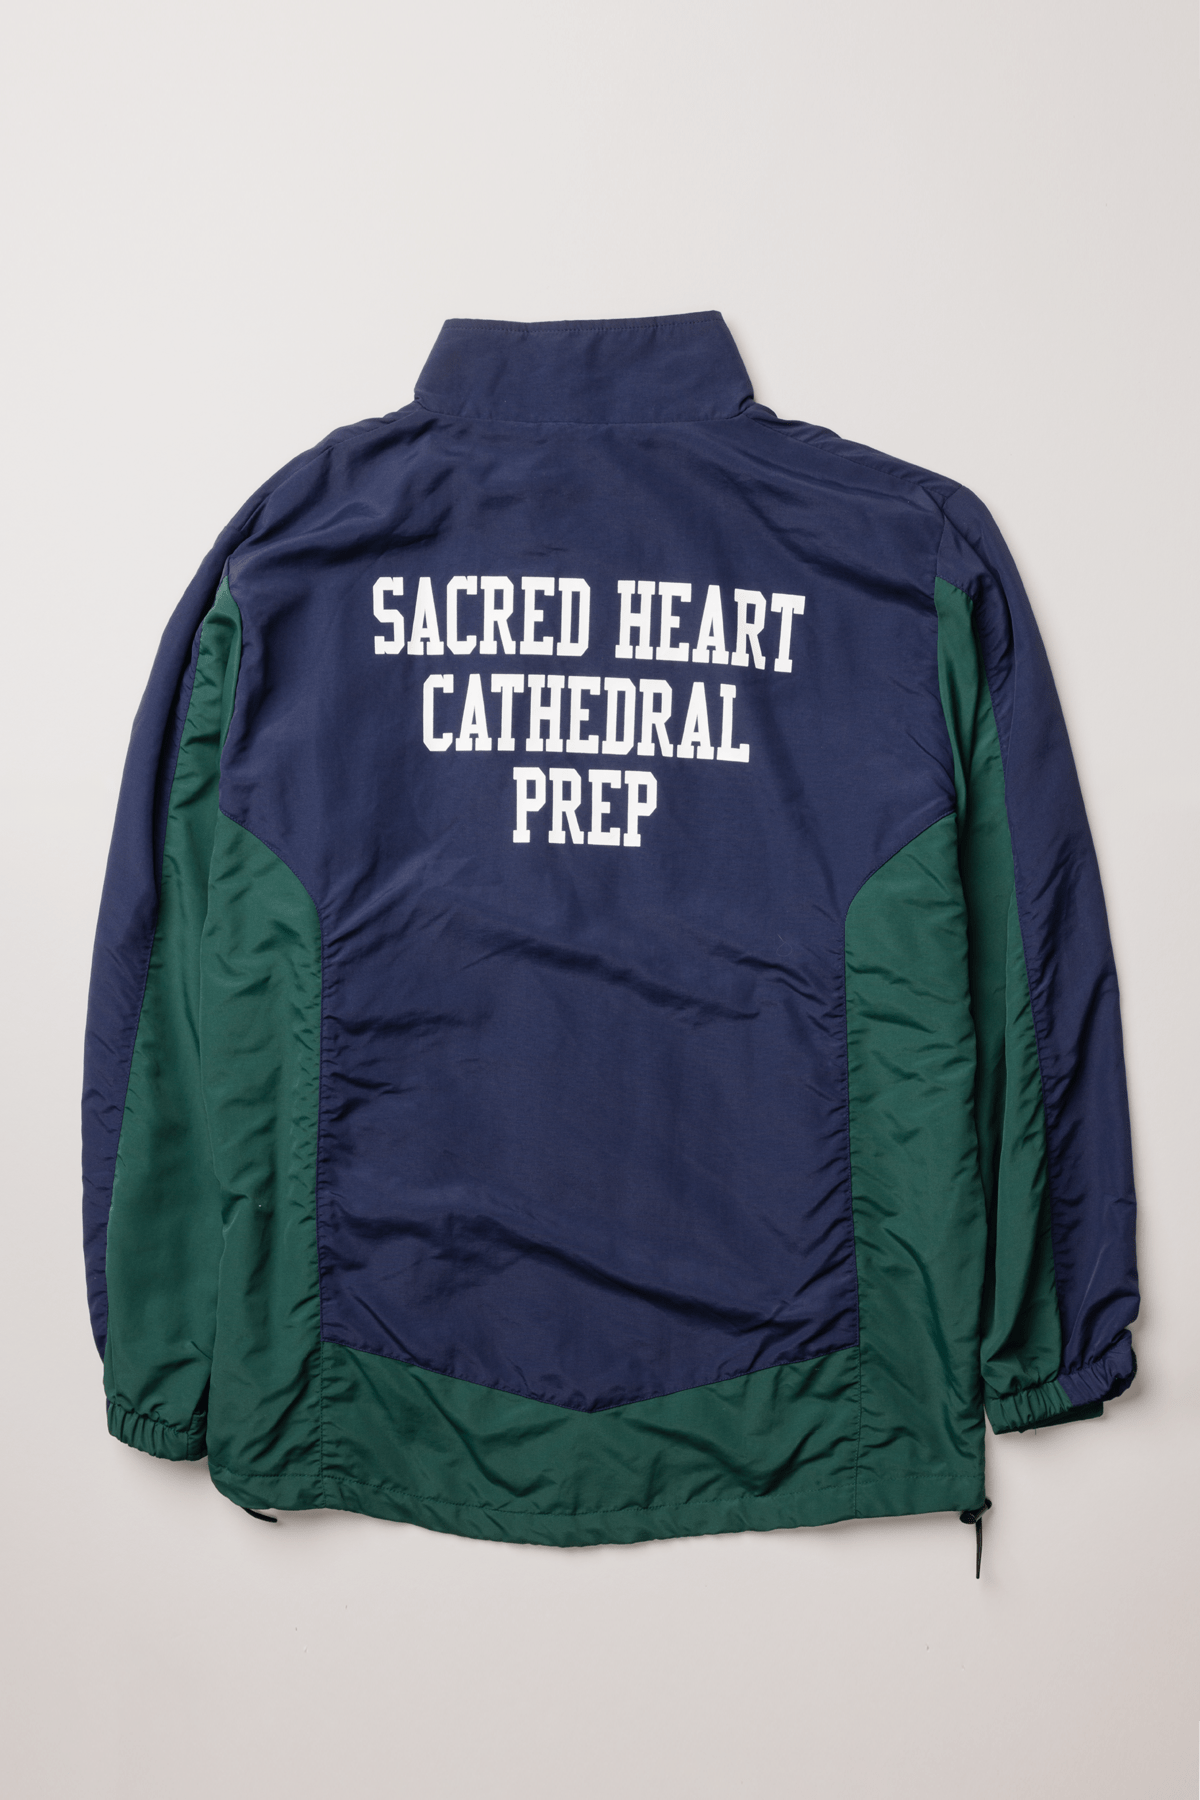 Sacred Heart Cathedral Prep PRECISION Jacket Large